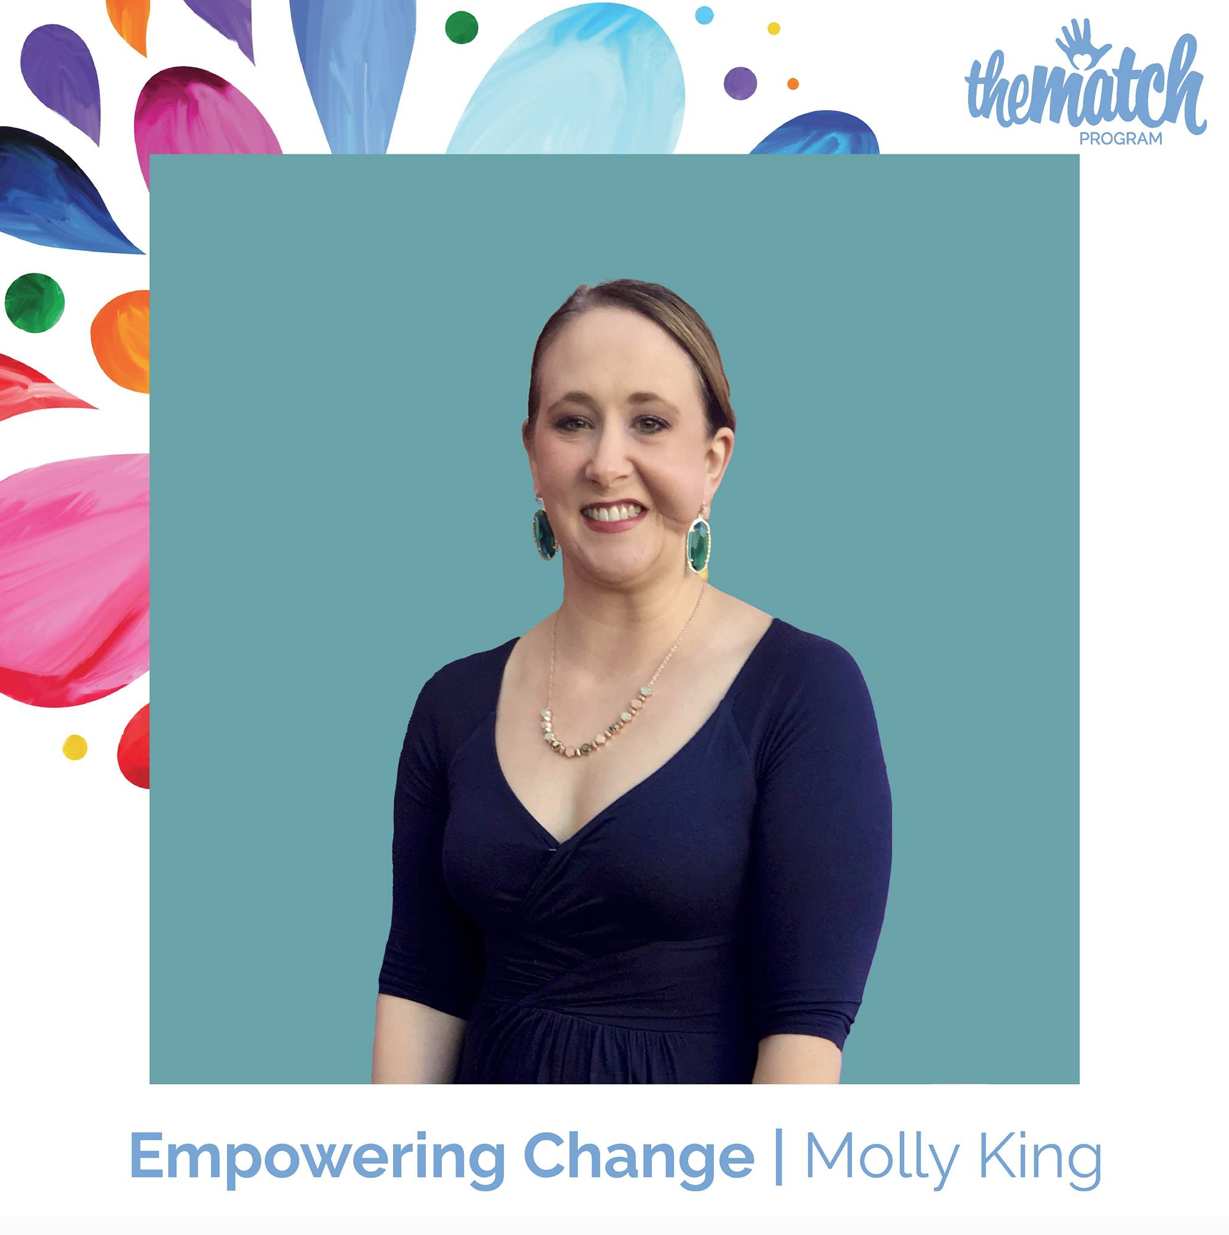 Empowering Change: Molly King